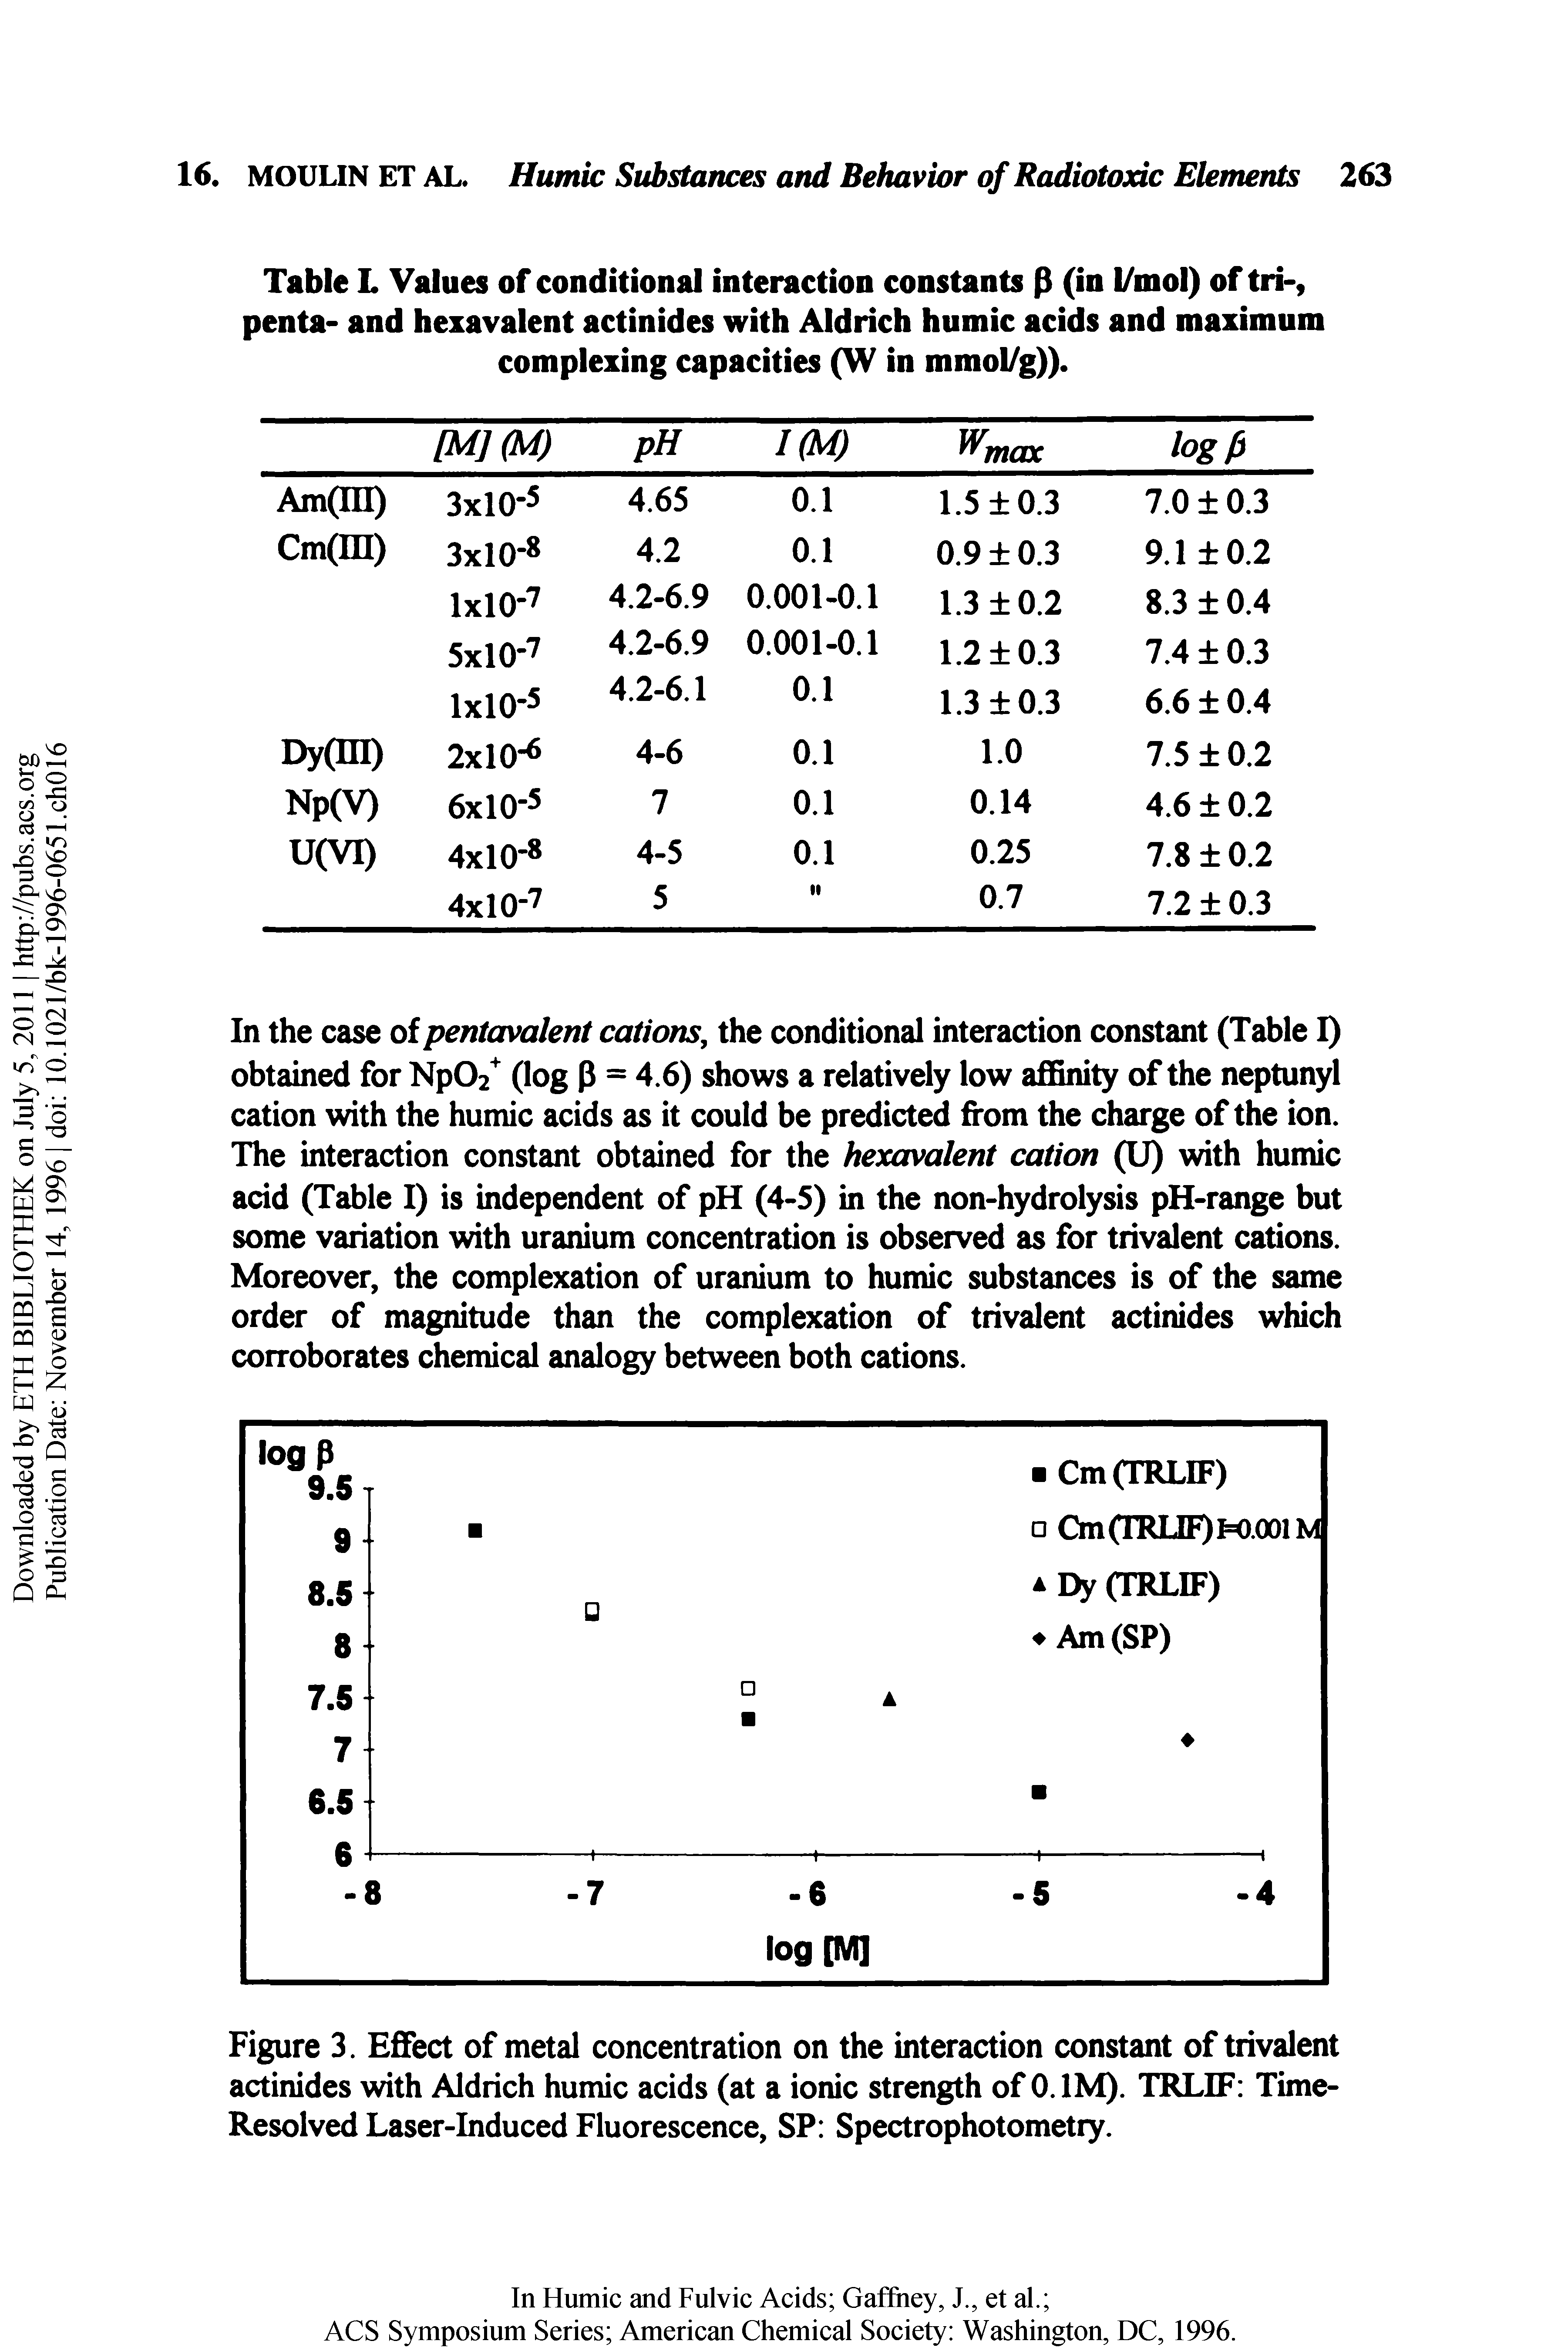 Table L Values of conditional interaction constants P (in l/mol) of tri-, penta- and hexavalent actinides with Aldrich humic acids and maximum complexing capacities (W in mmol/g)).